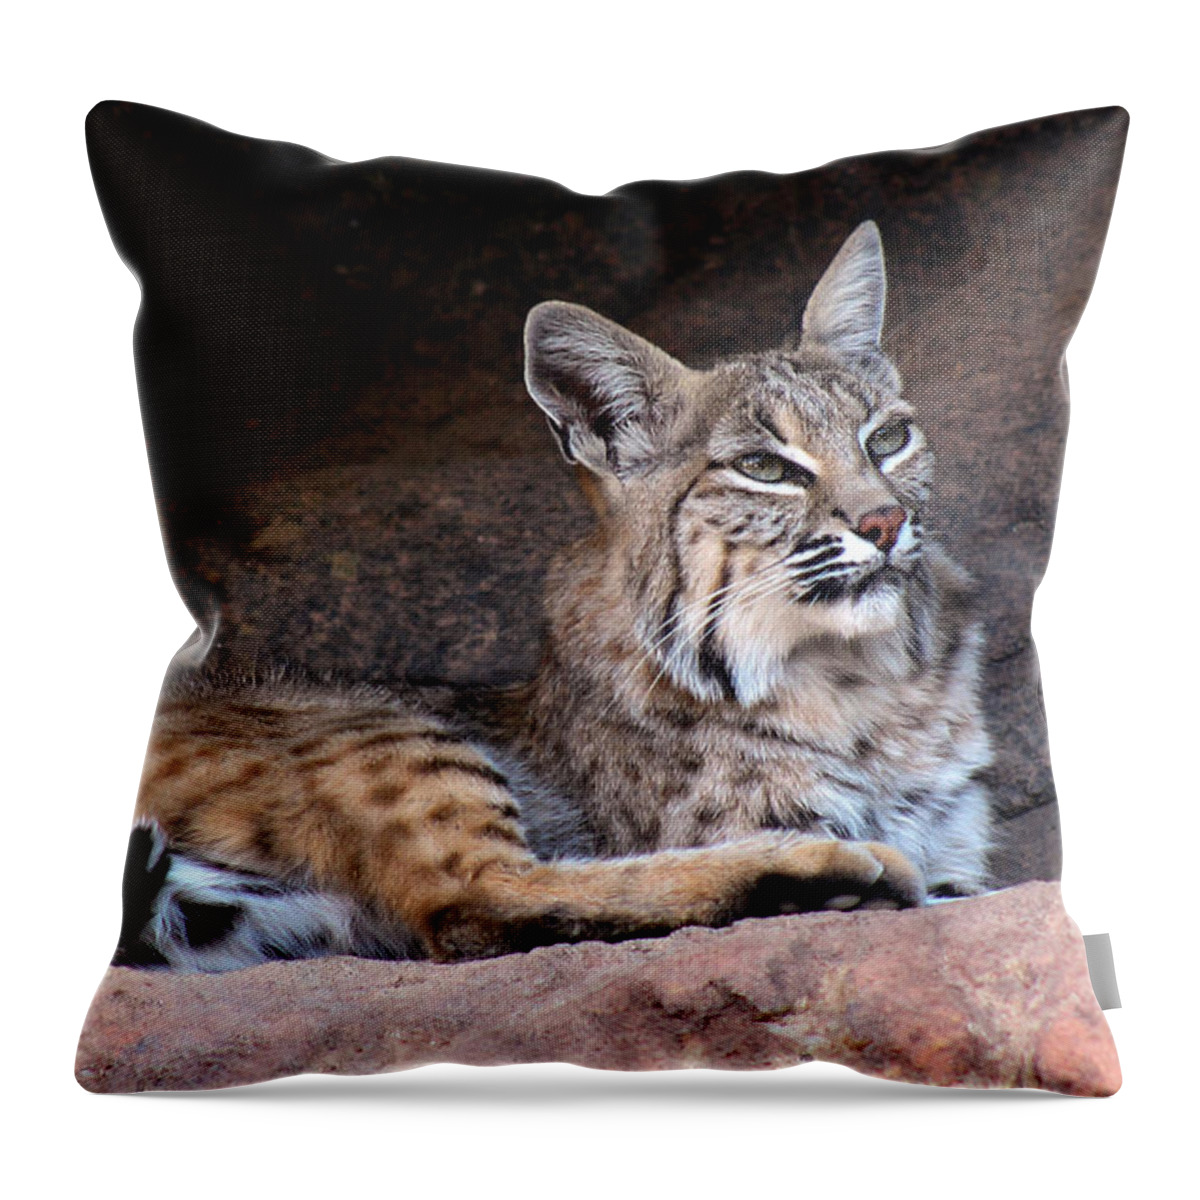 Bobcats Throw Pillow featuring the photograph Hmm What To Do by Elaine Malott